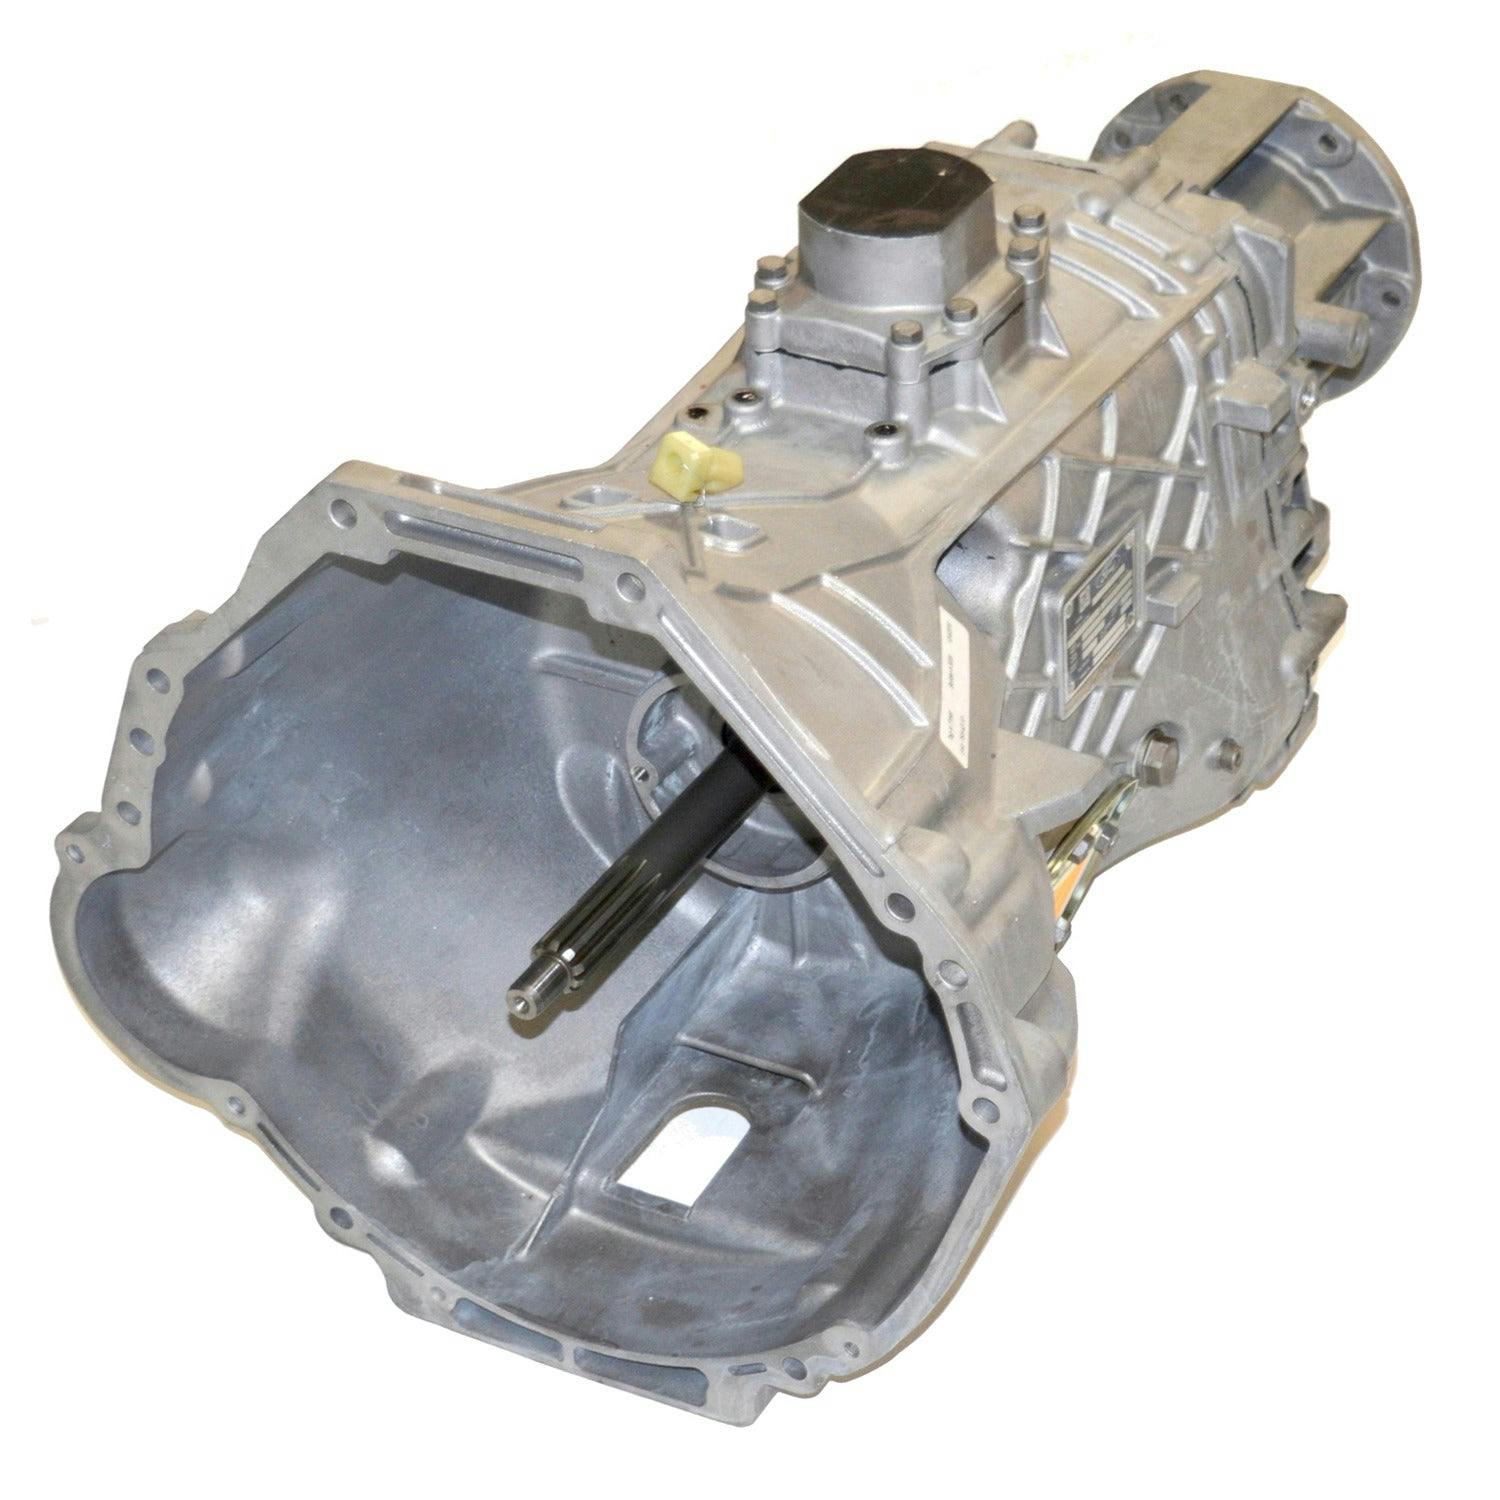 Manual Transmission for 1988-1996 Ford Bronco/F-150, 250, 350 4WD with 4.9/5/5.8L Engine